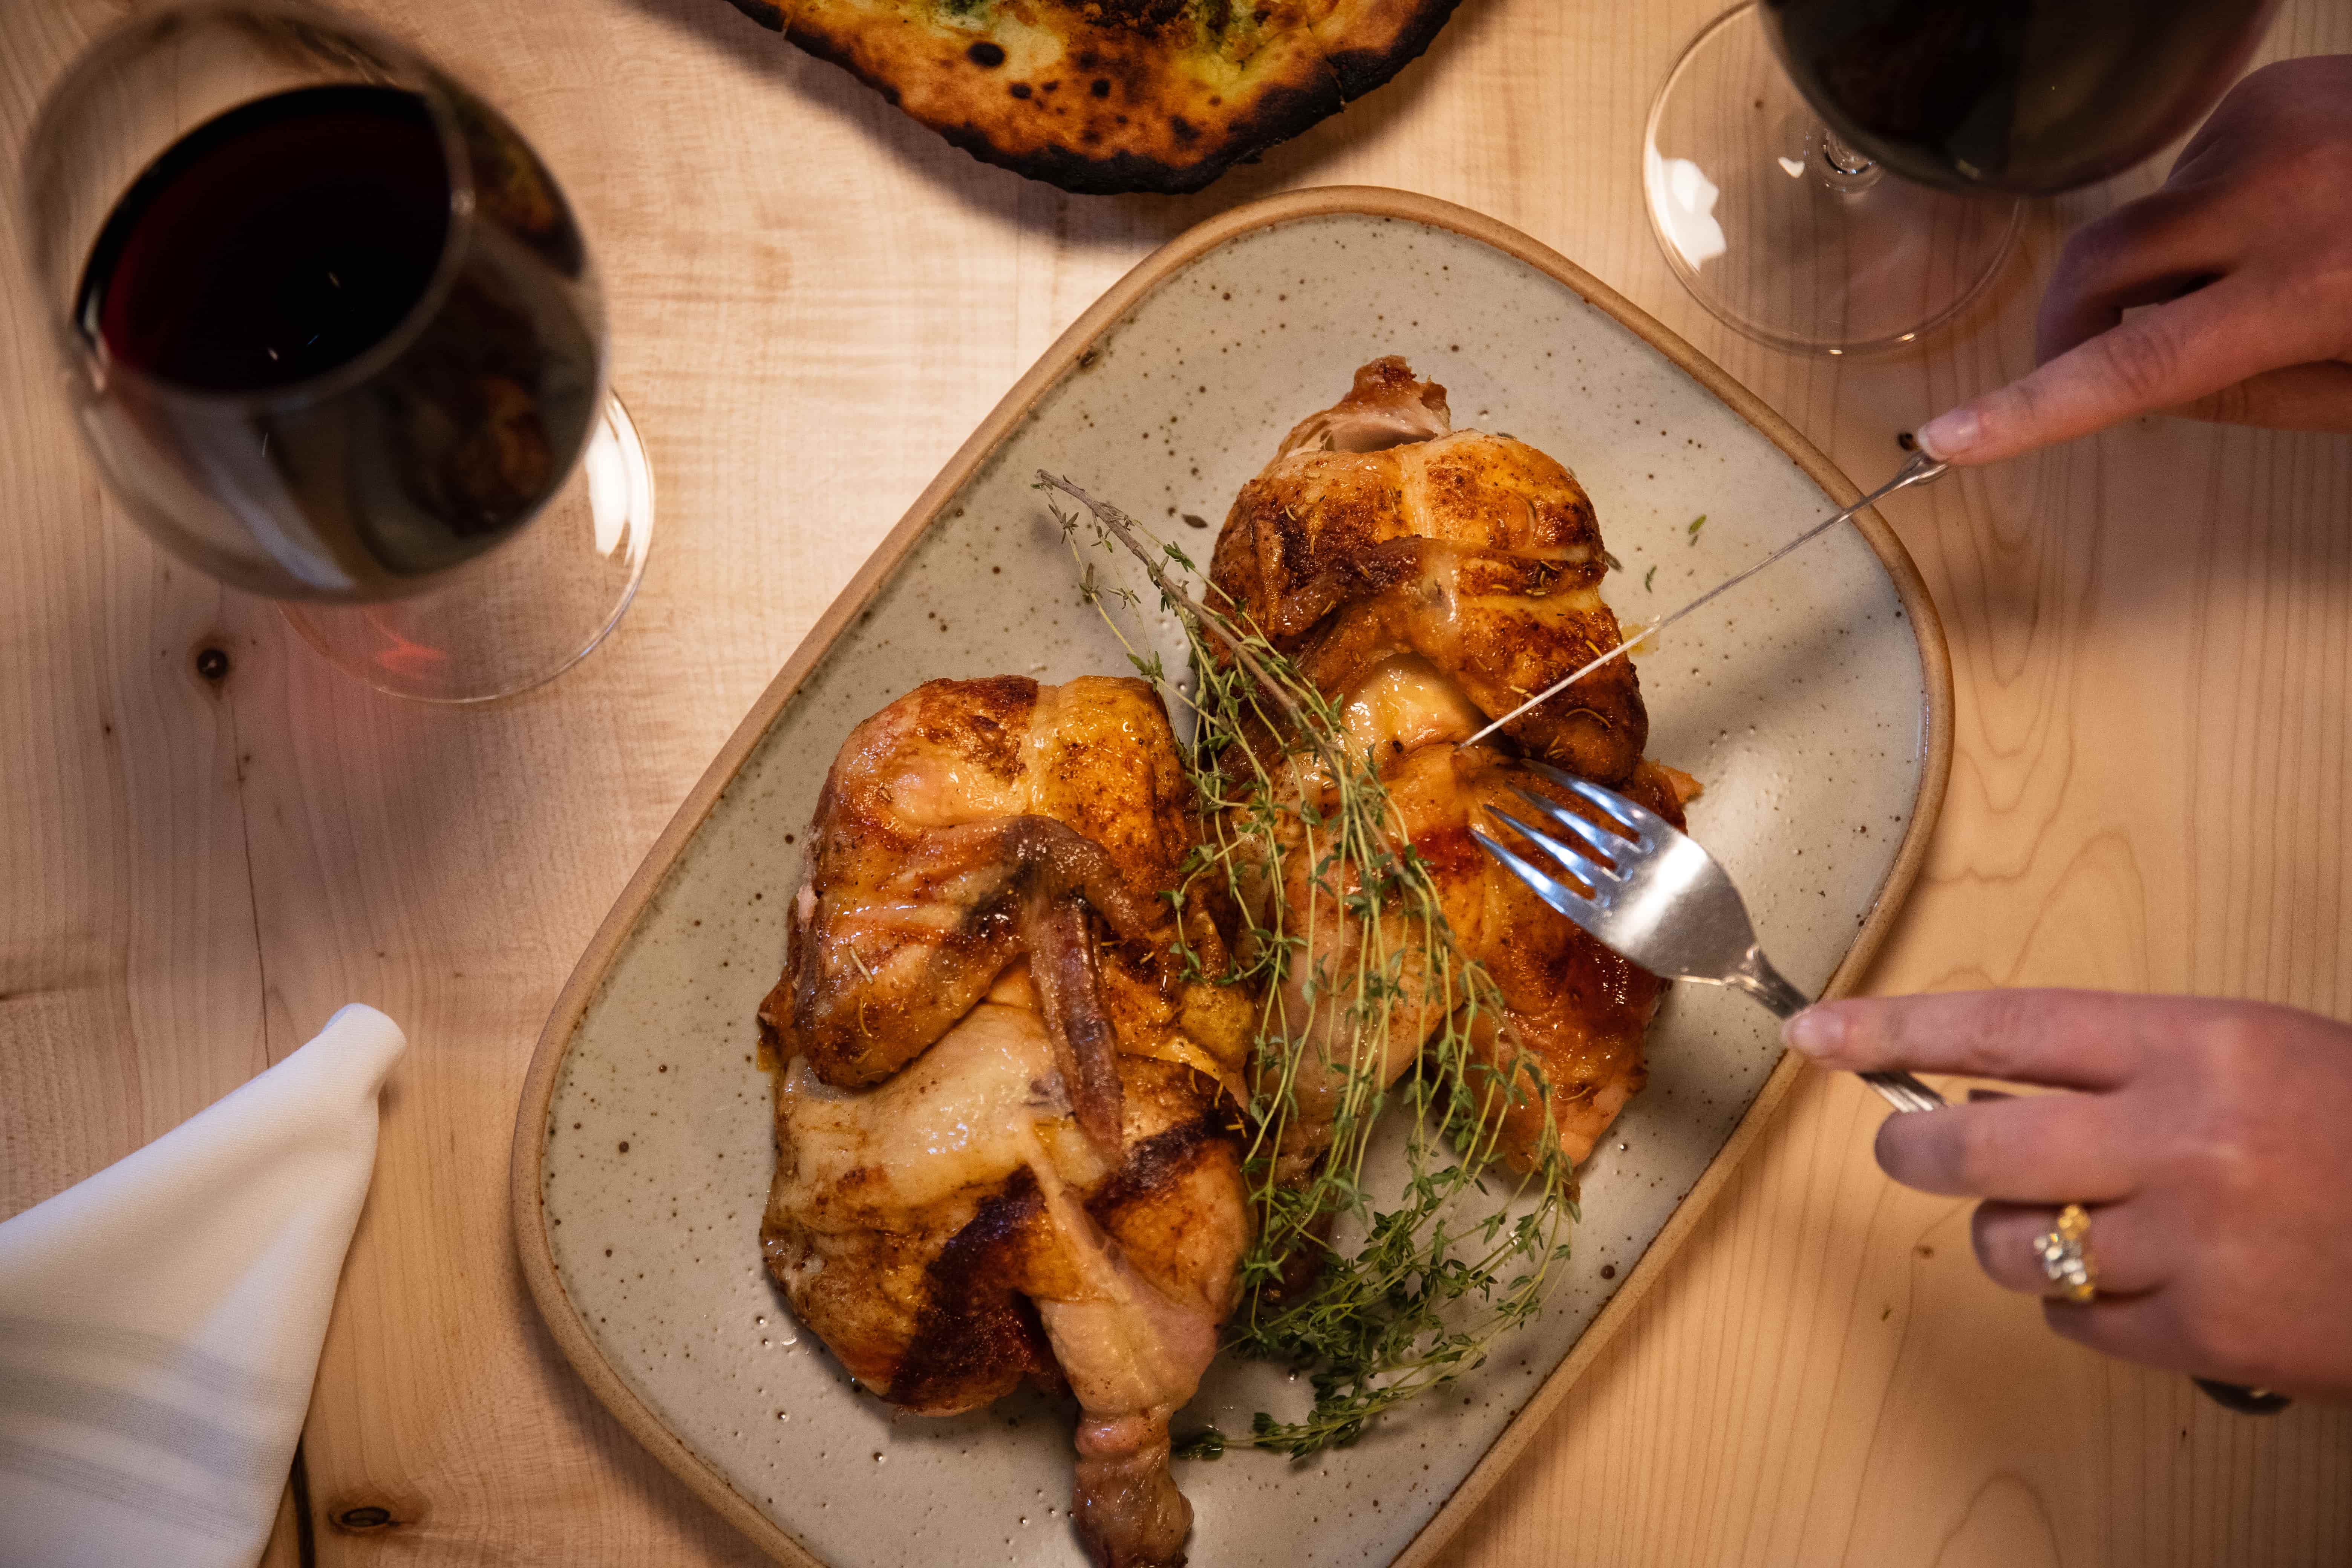 A patron digs into a plate of rotisserie chicken at Farm & Fire.